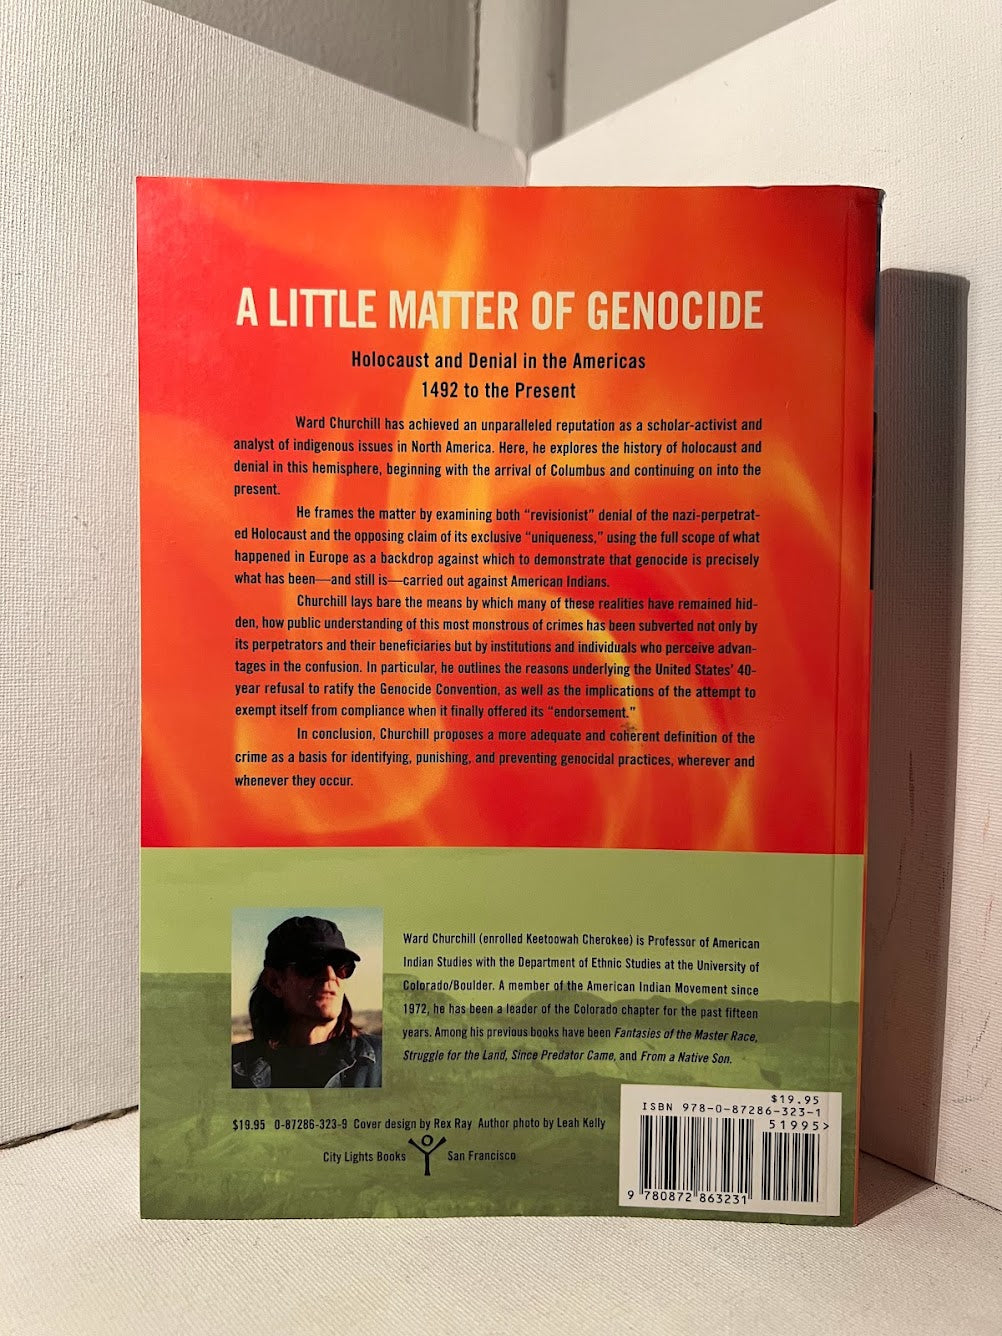 A Little Matter of Genocide by Ward Churchill